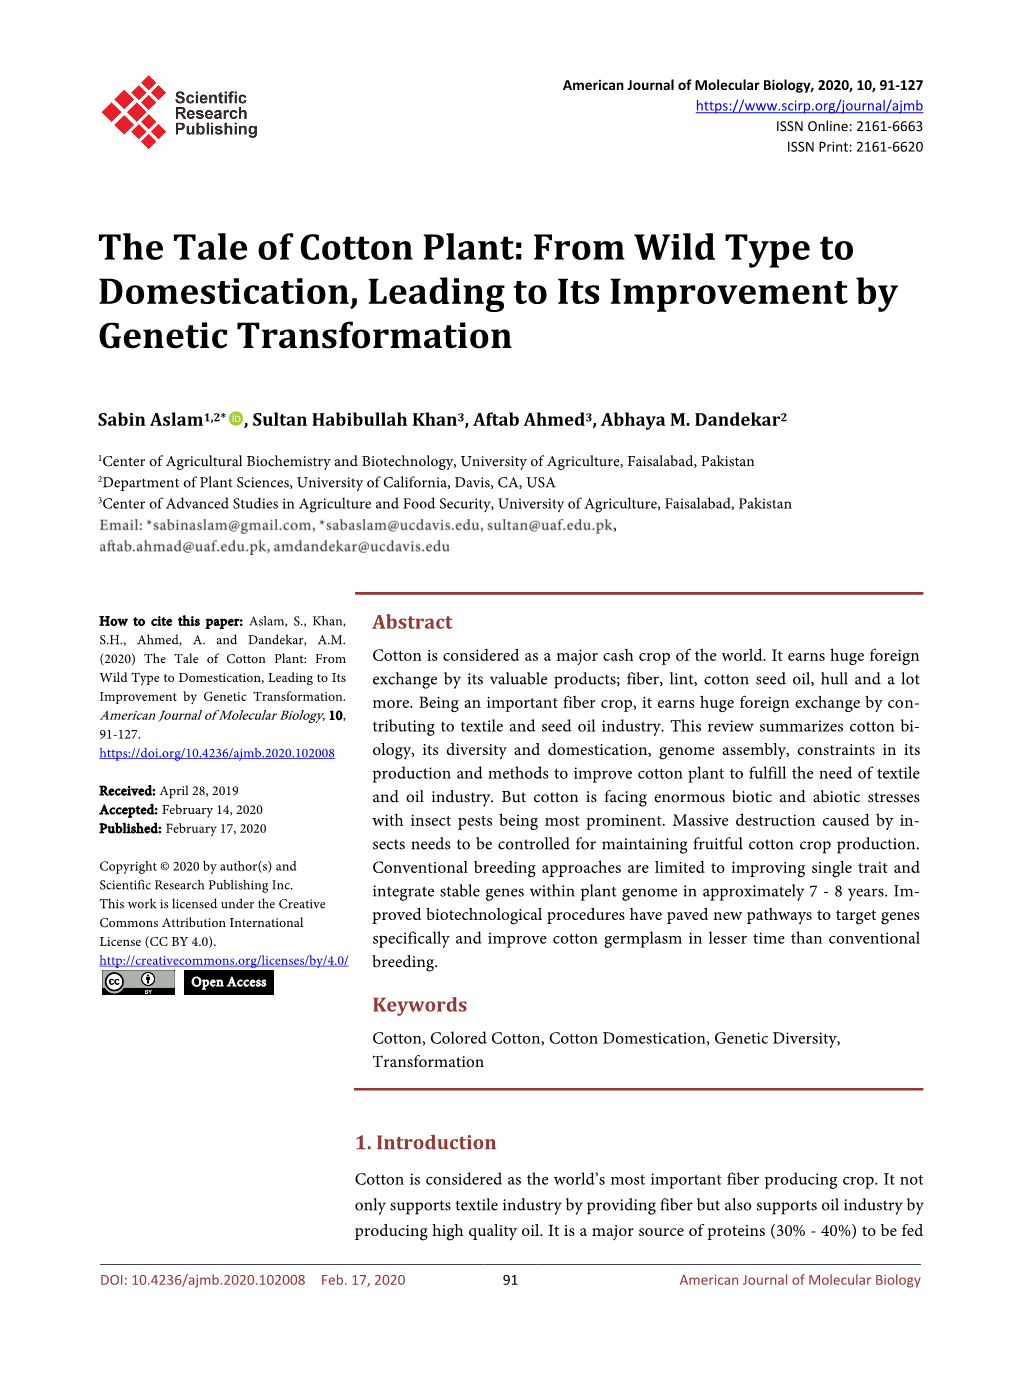 From Wild Type to Domestication, Leading to Its Improvement by Genetic Transformation